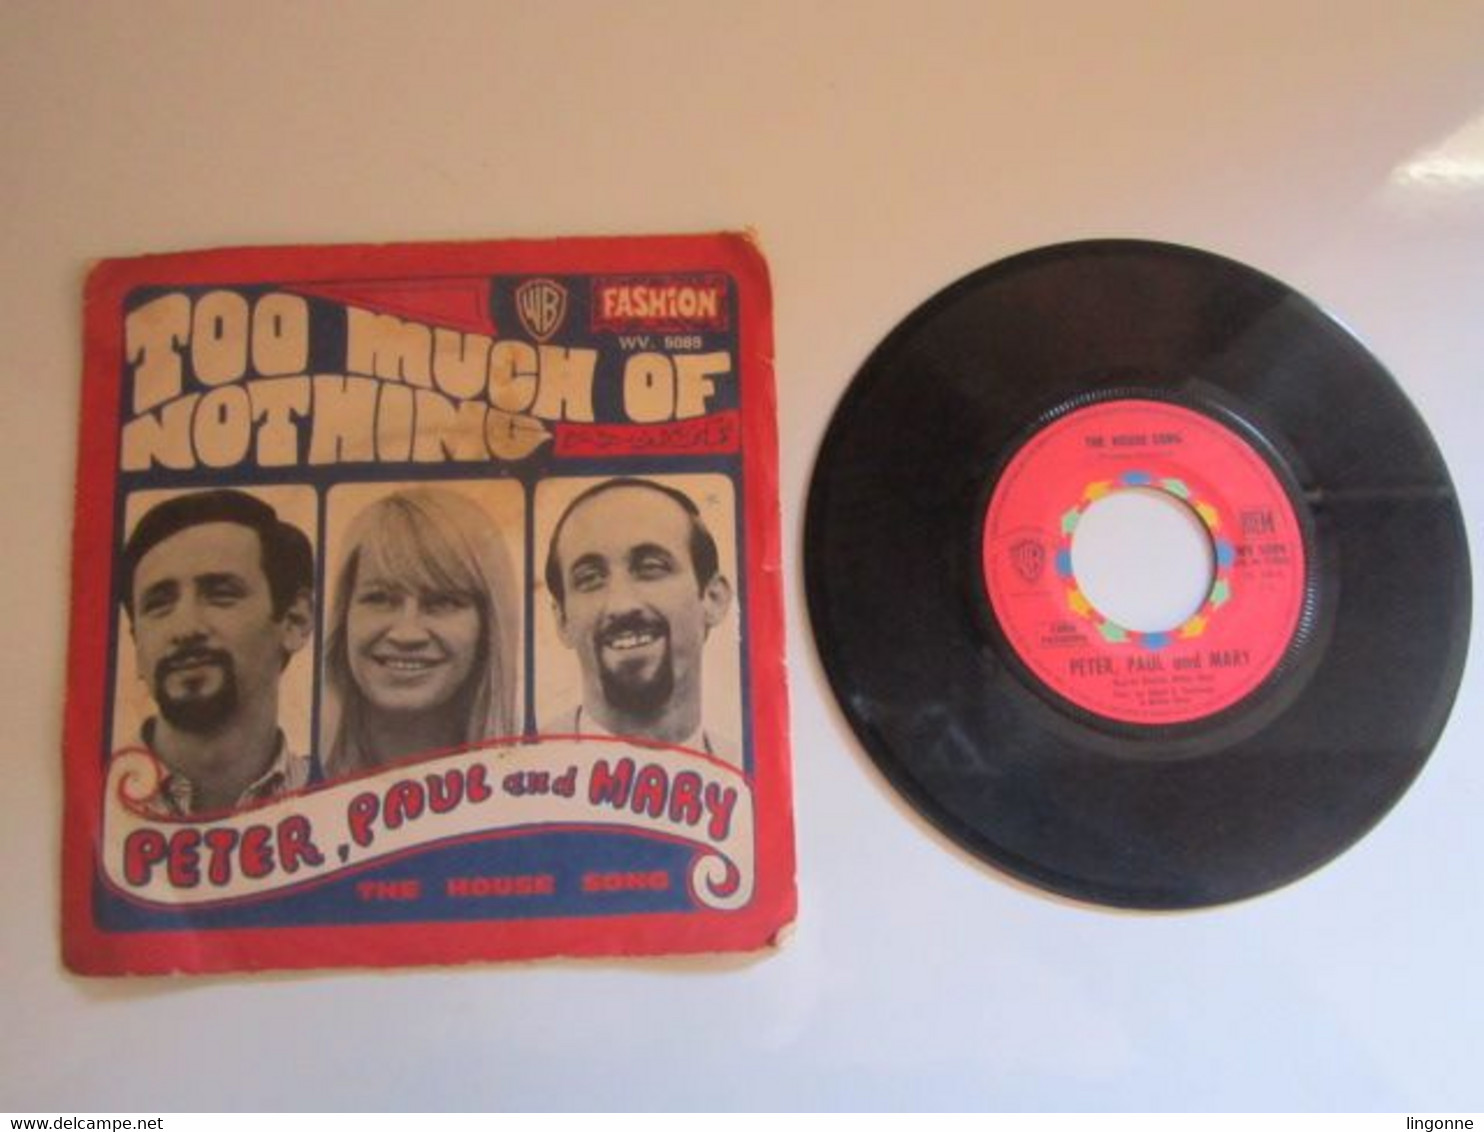 1968 Vinyle 45 Tours Peter, Paul And Mary – Too Much Of Nothing - Country Et Folk